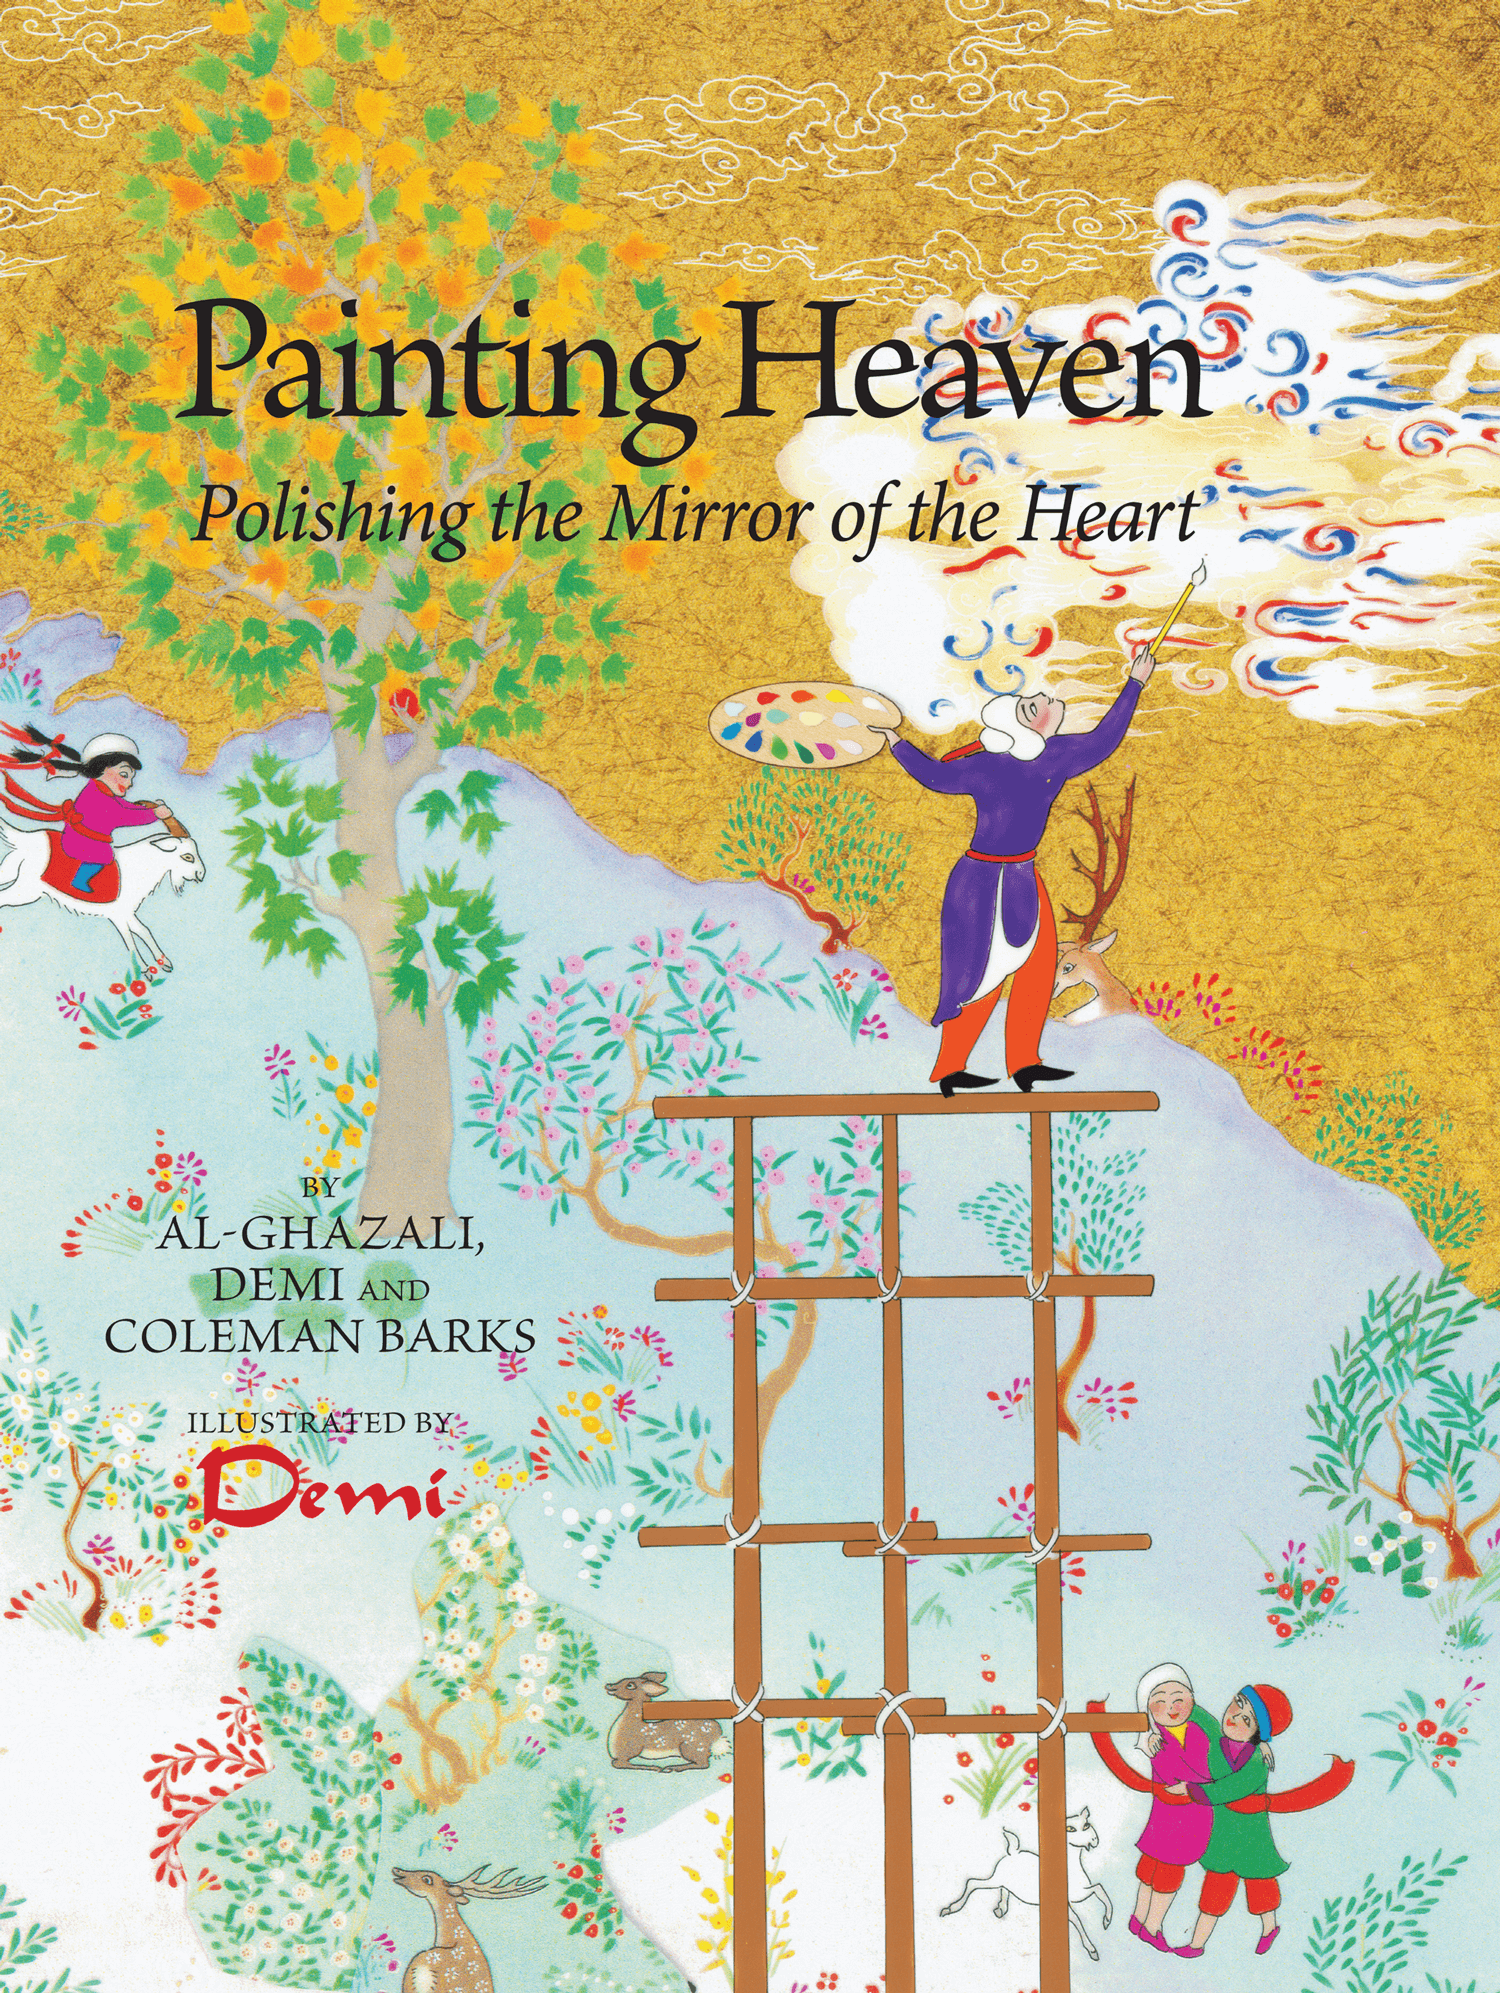 Painting Heaven: Polishing the Mirror of the Heart